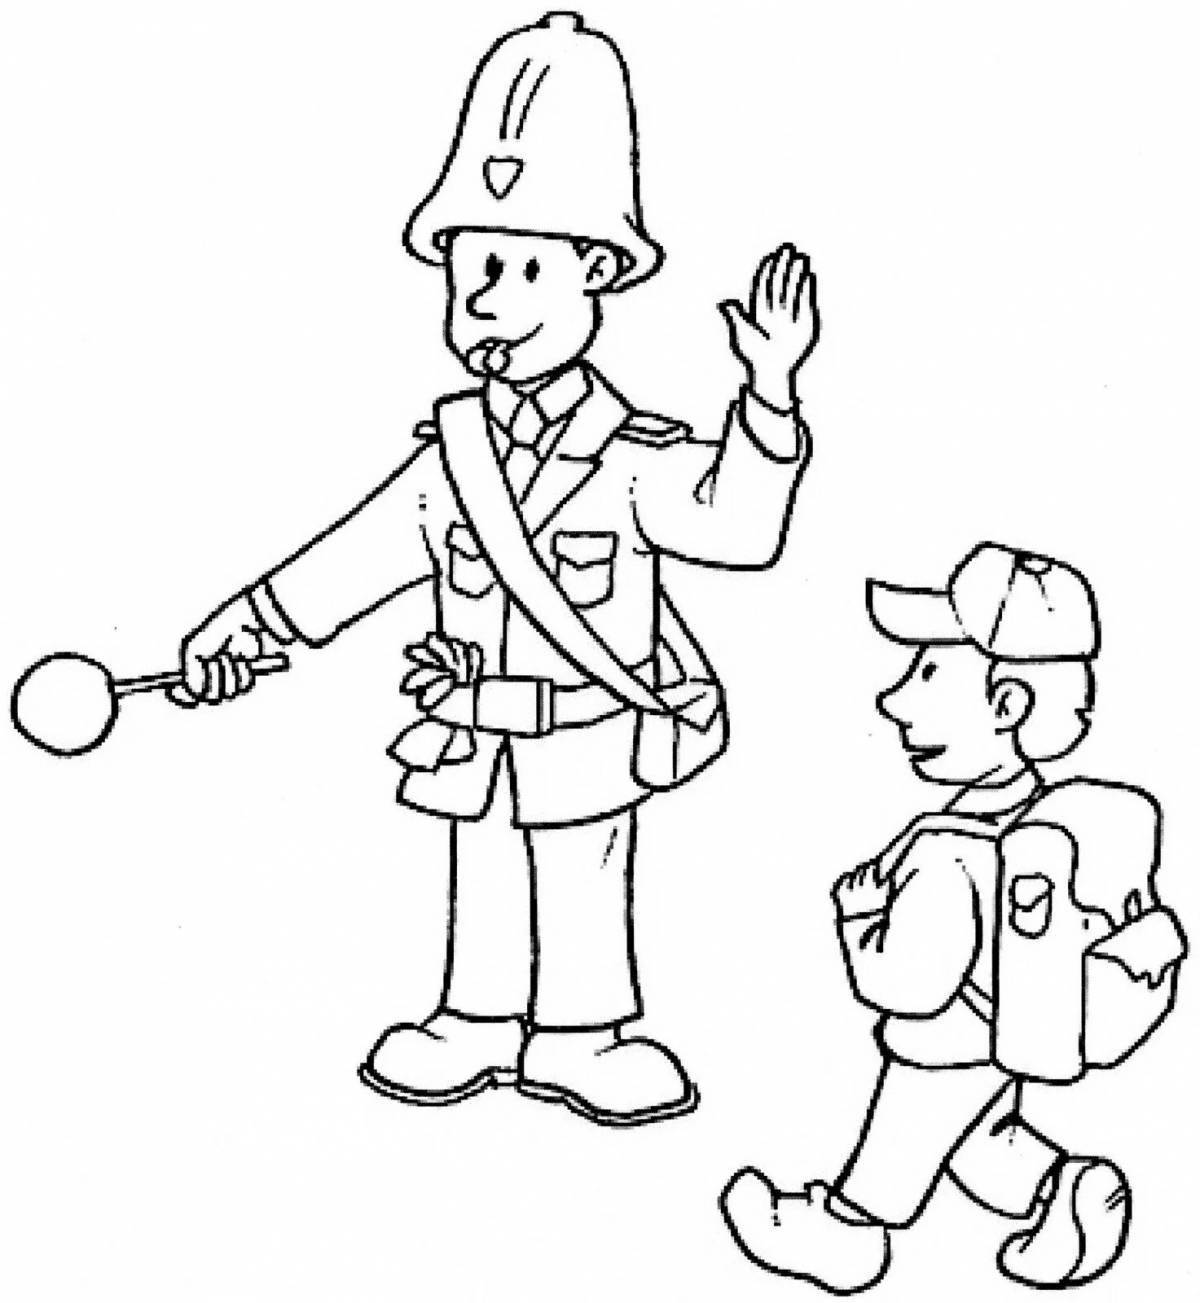 Junior traffic controller playful coloring page